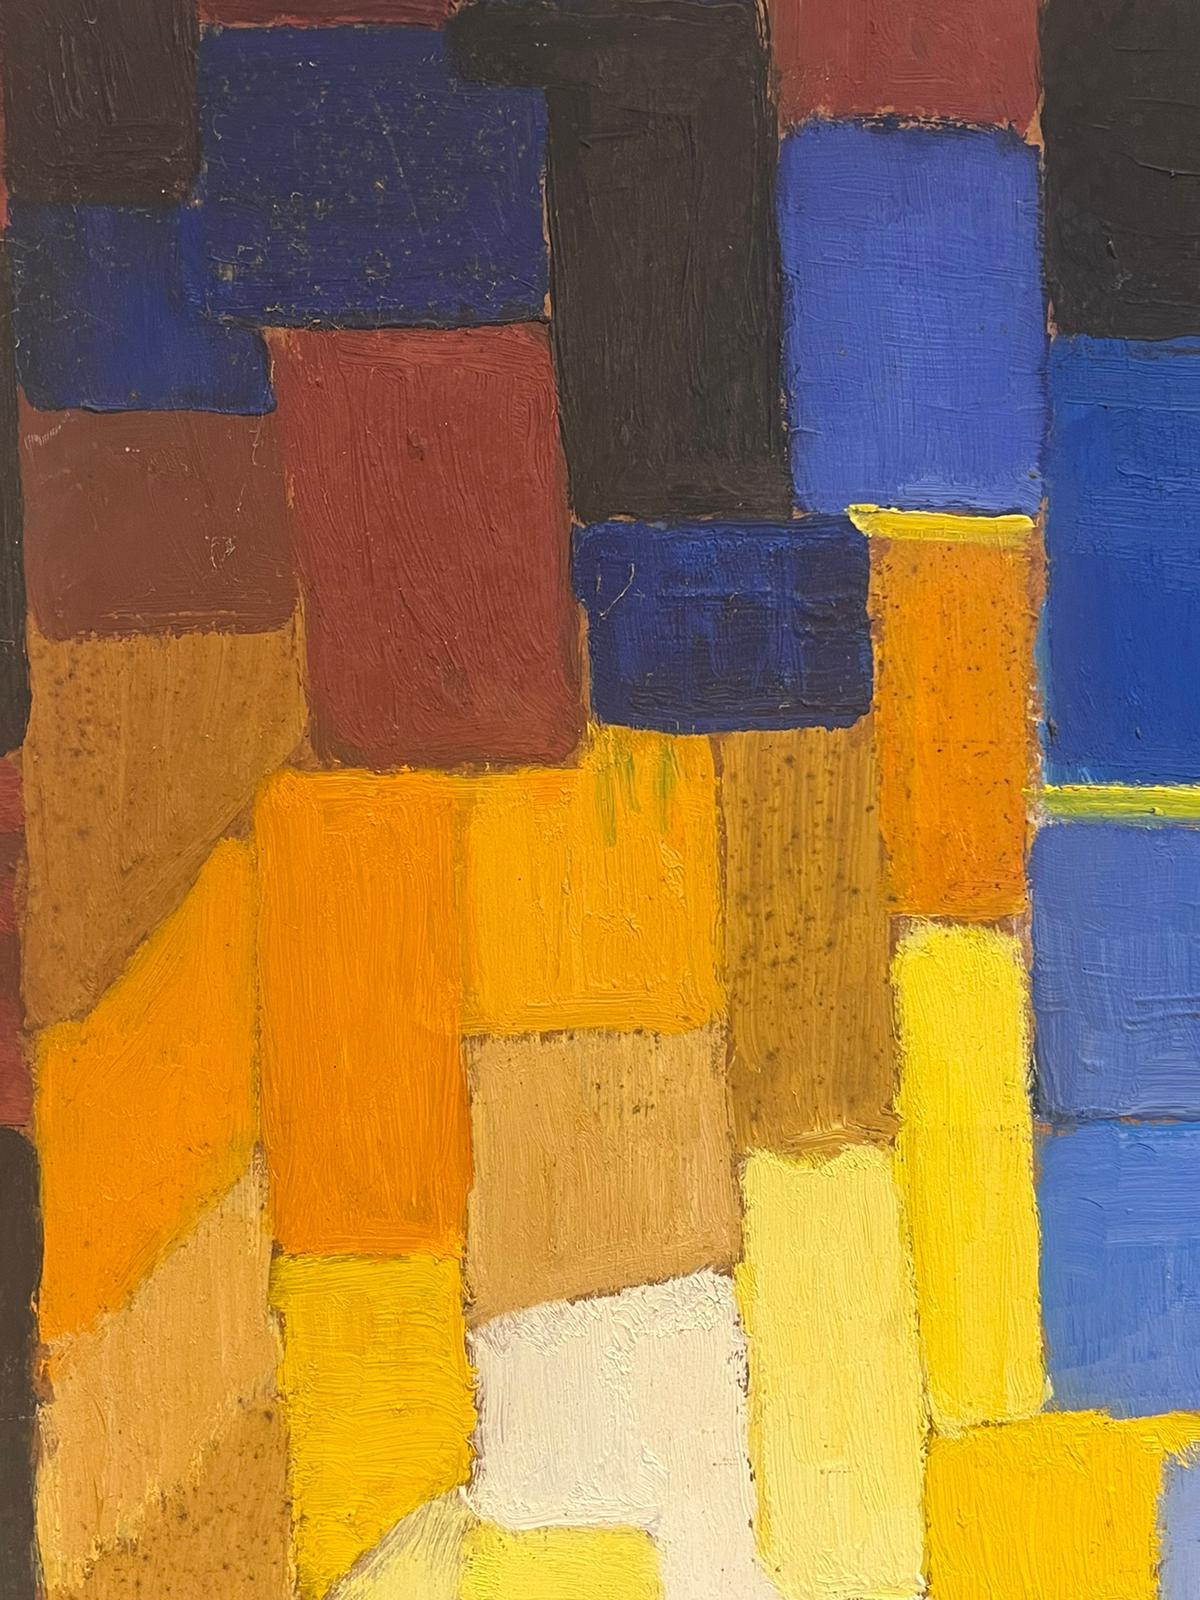 20th Century French Cubist Oil Painting Blues Oranges Yellow & Beige Cubes For Sale 2